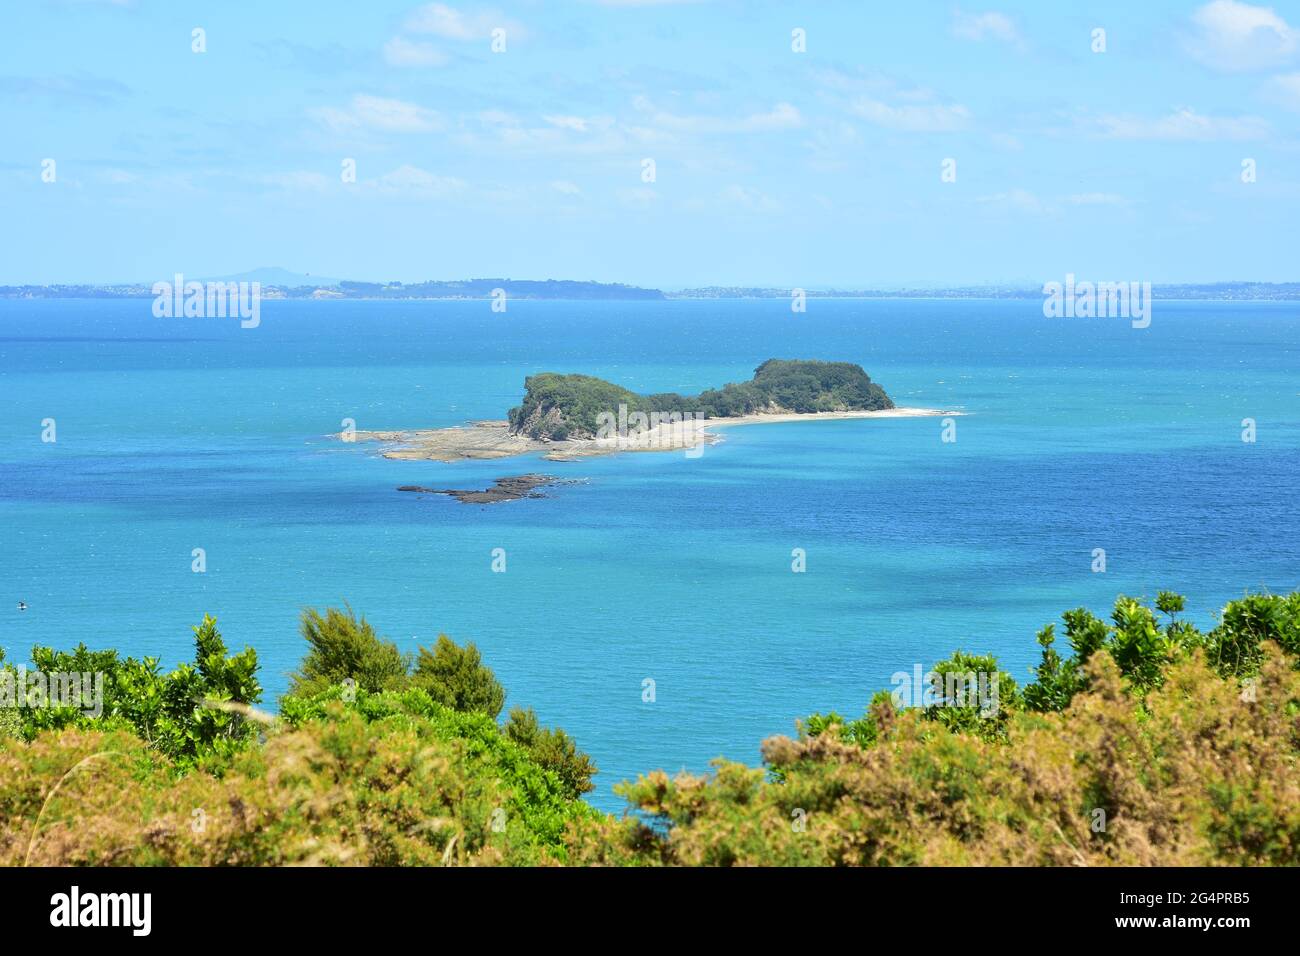 View of Saddle Island in blue waters of Hauraki Gulf with reefs along shoreline exposed during low tide. Stock Photo